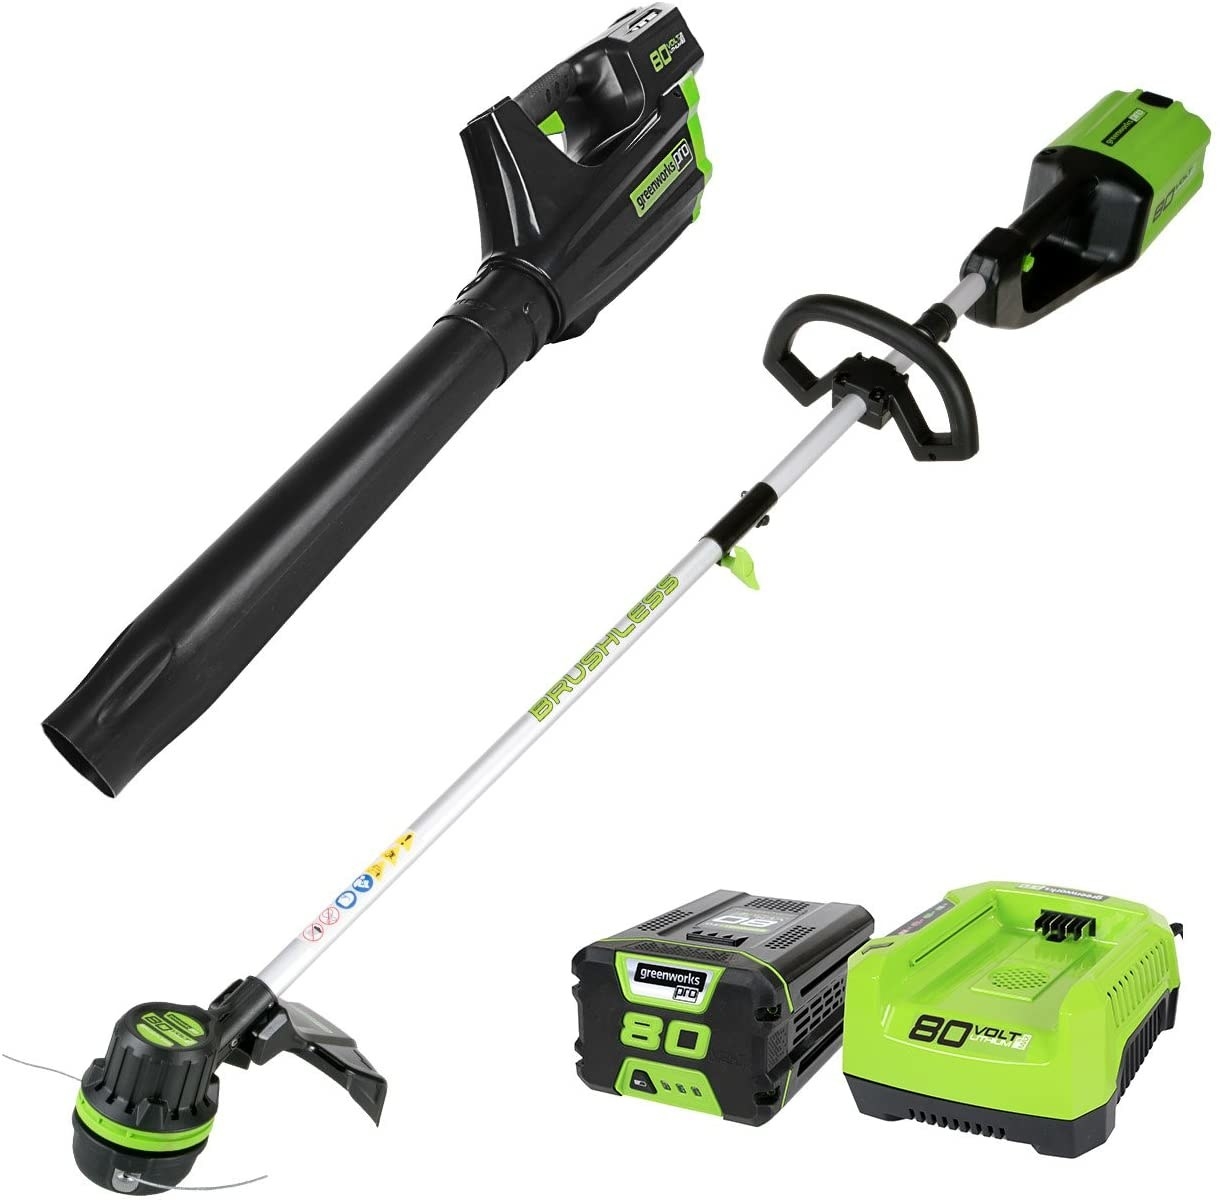 the green weed whacker and leaf blower with batteries